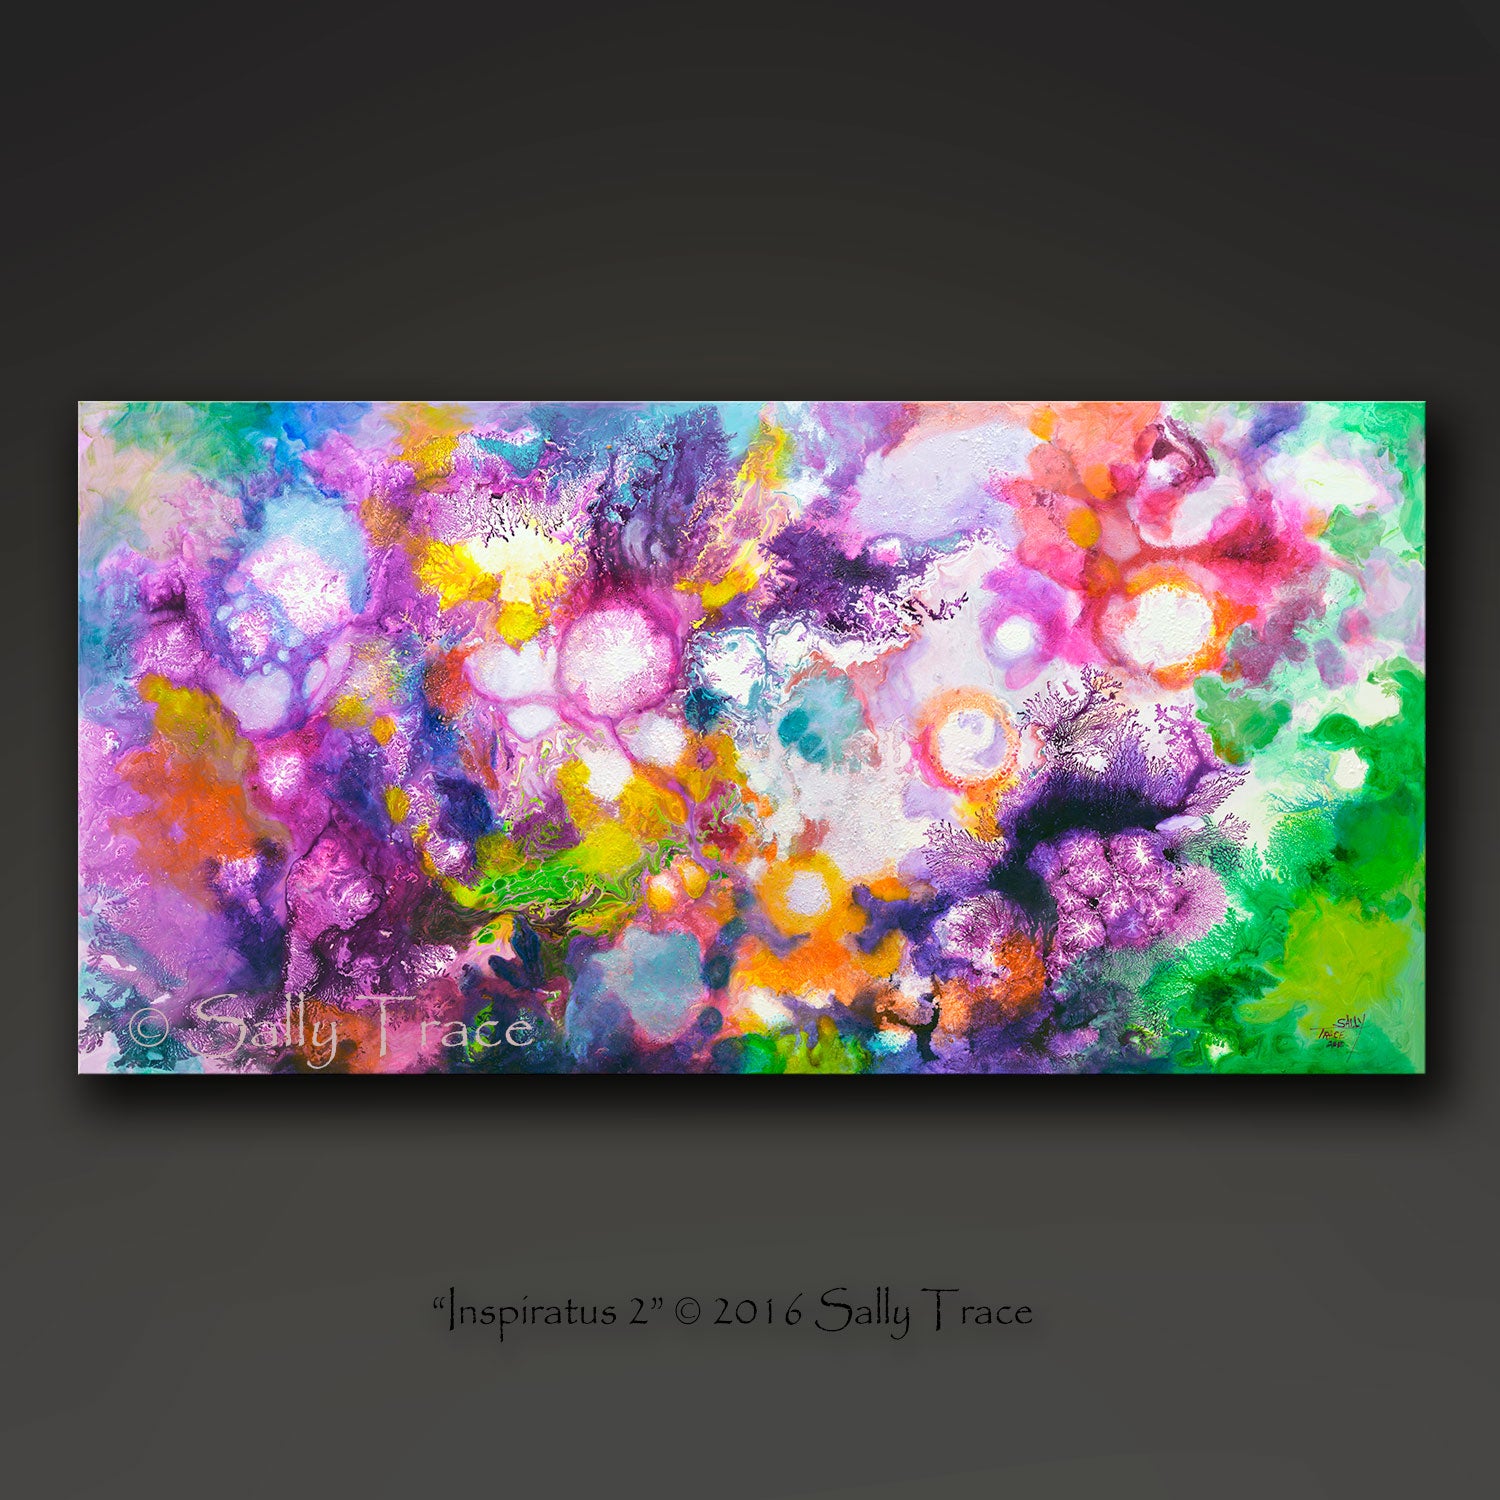 Inspiratus 2, fluid art giclee print for sale made from the original acrylic pour painting